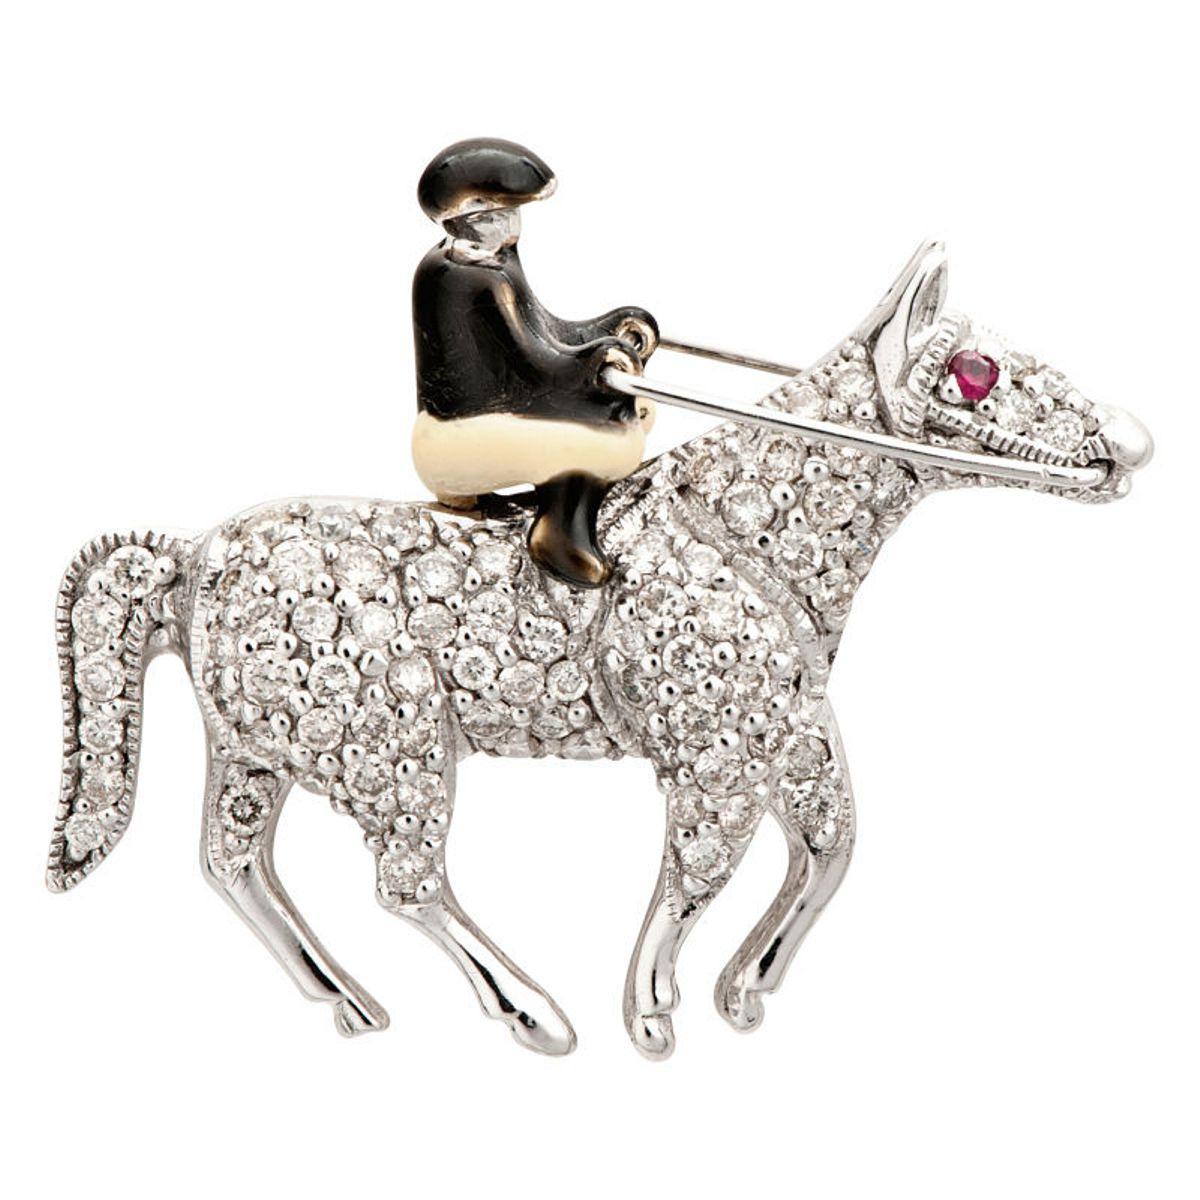 Women's or Men's 18 Carat White Gold Diamond Brooch in the Form of a Rider on Horseback